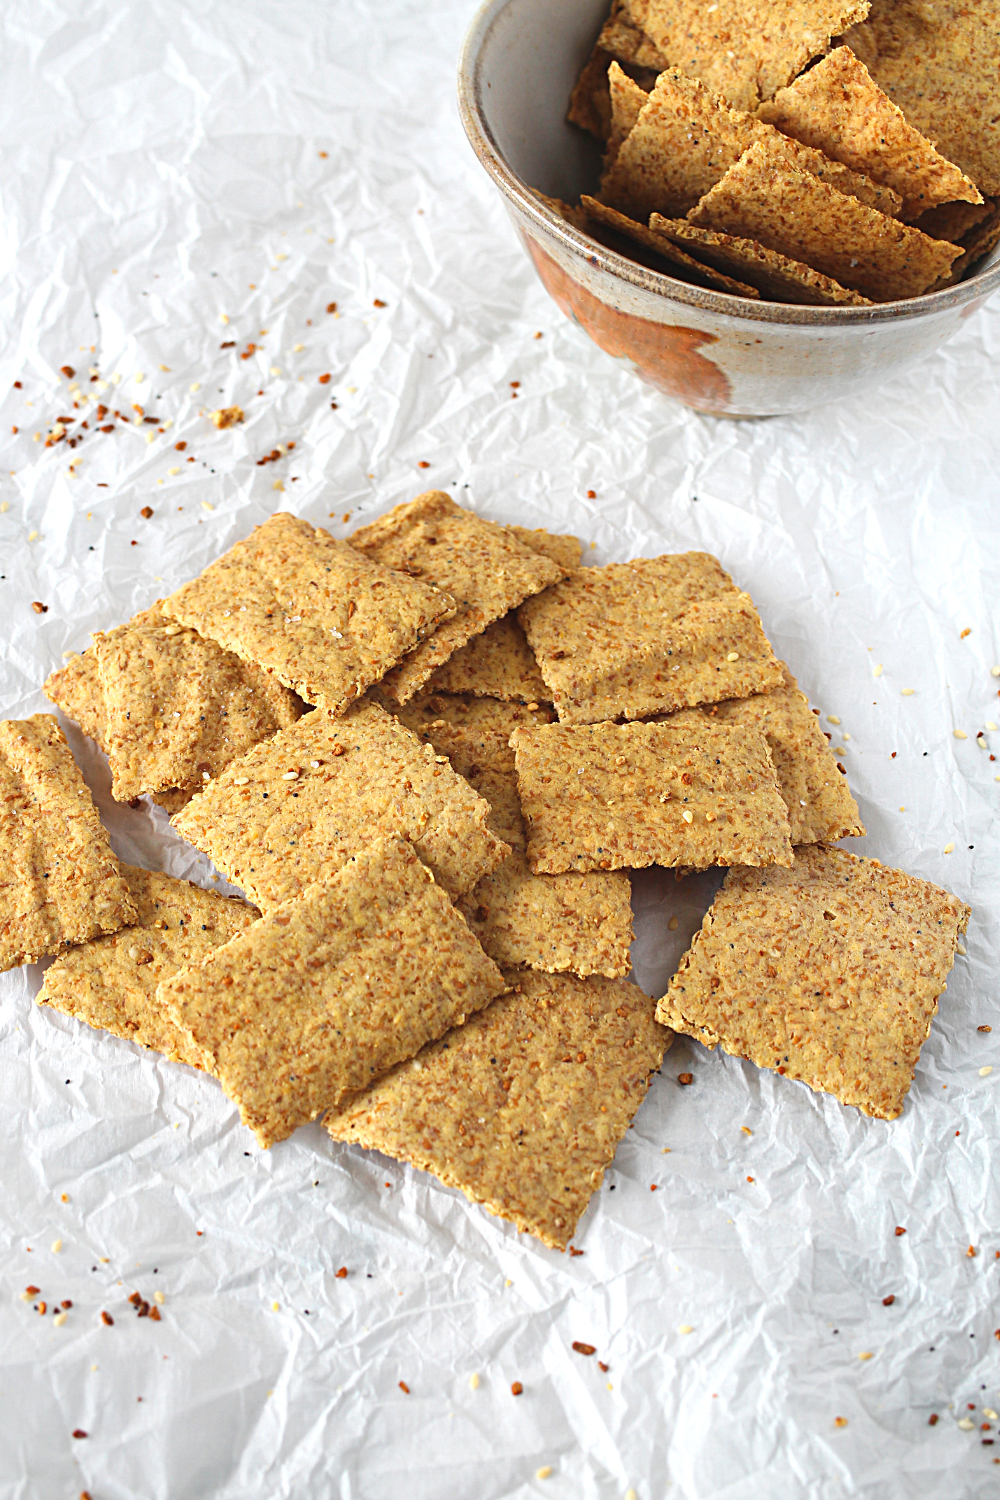 easy keto cracker recipe with only 3 ingredients